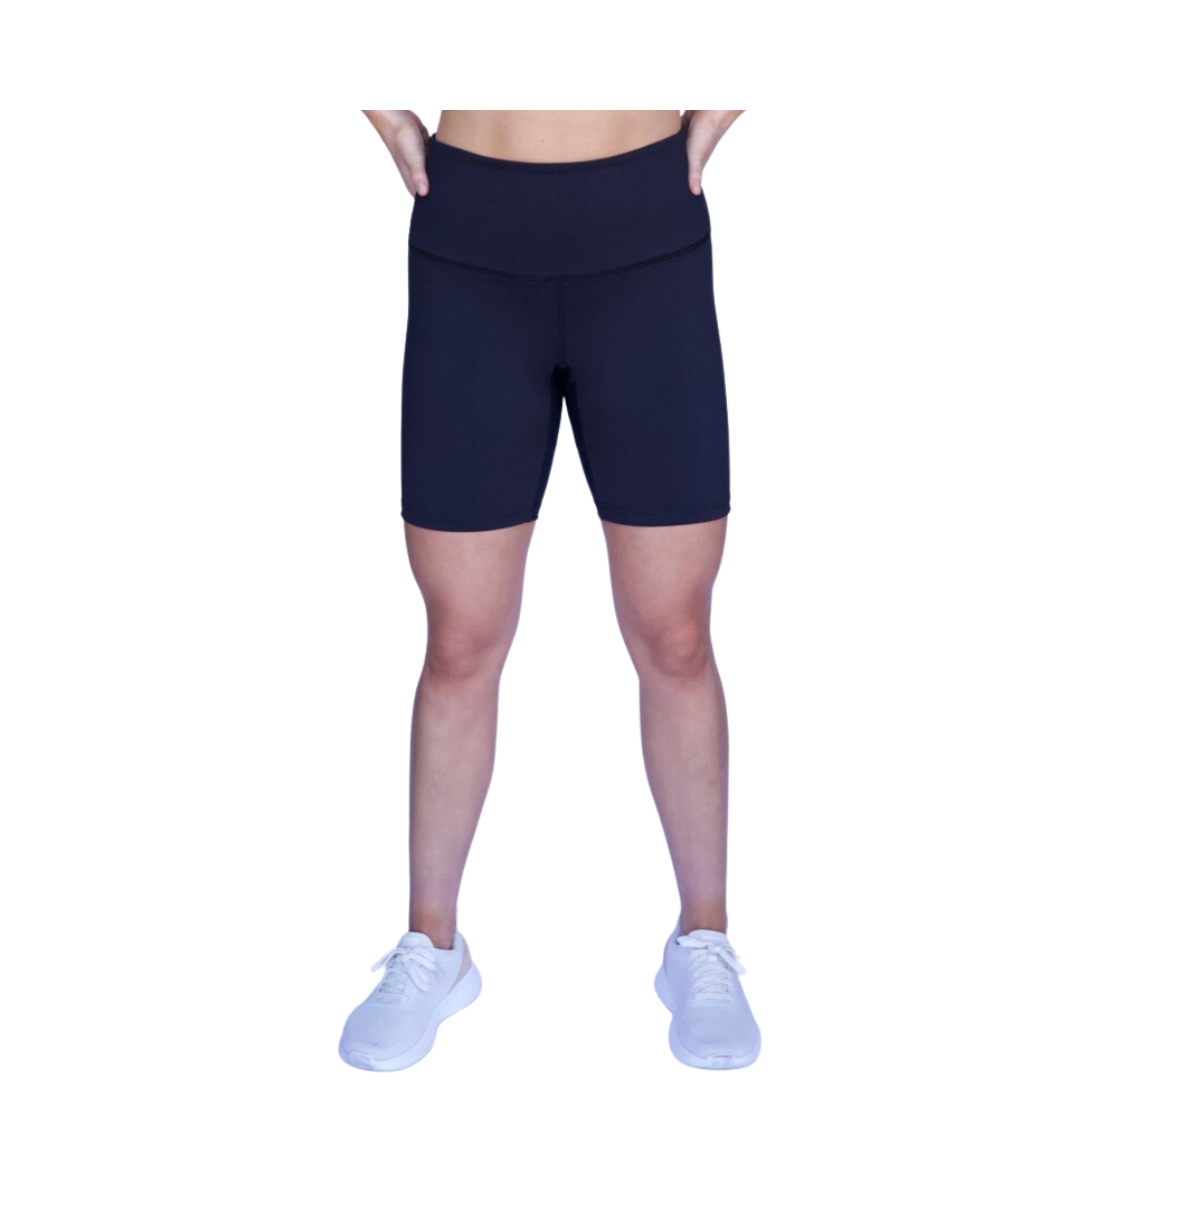 Women's Leakproof Activewear 7" Shorts For Bladder Leaks and Periods - Black